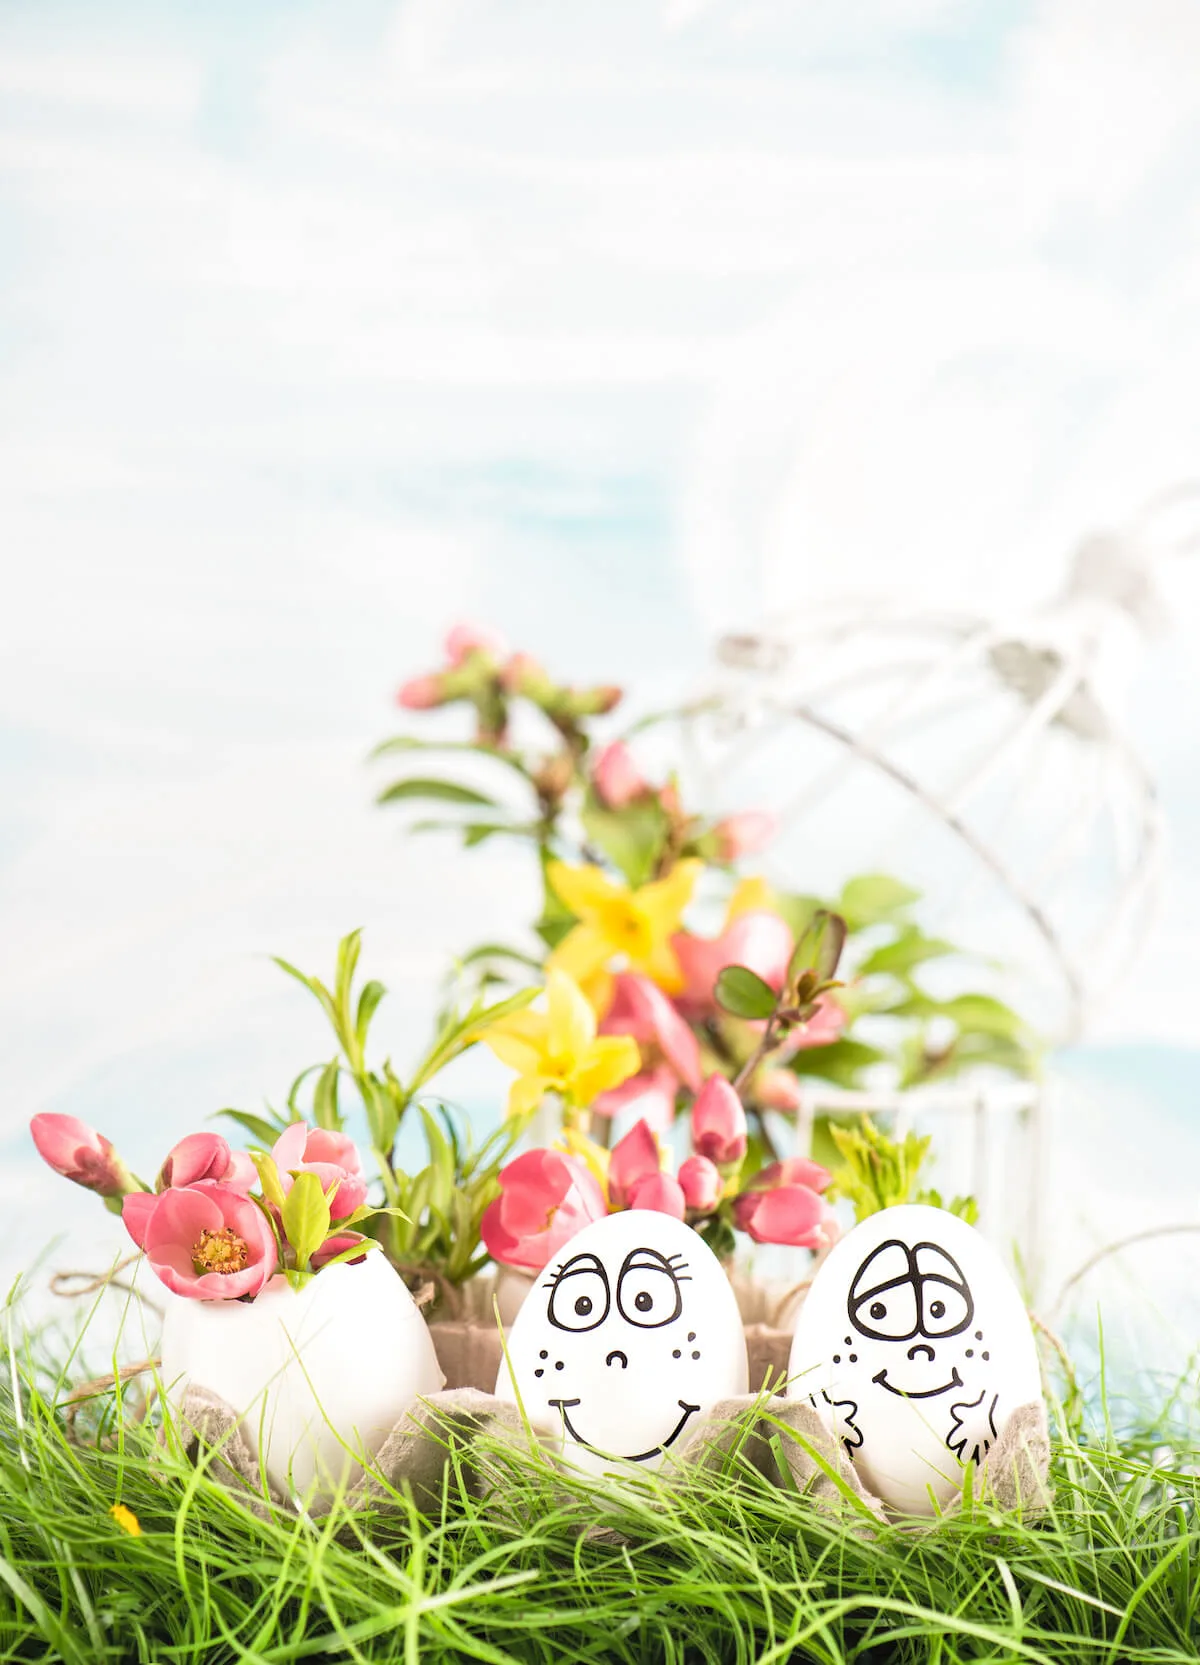 Eggs decorated with funny faces